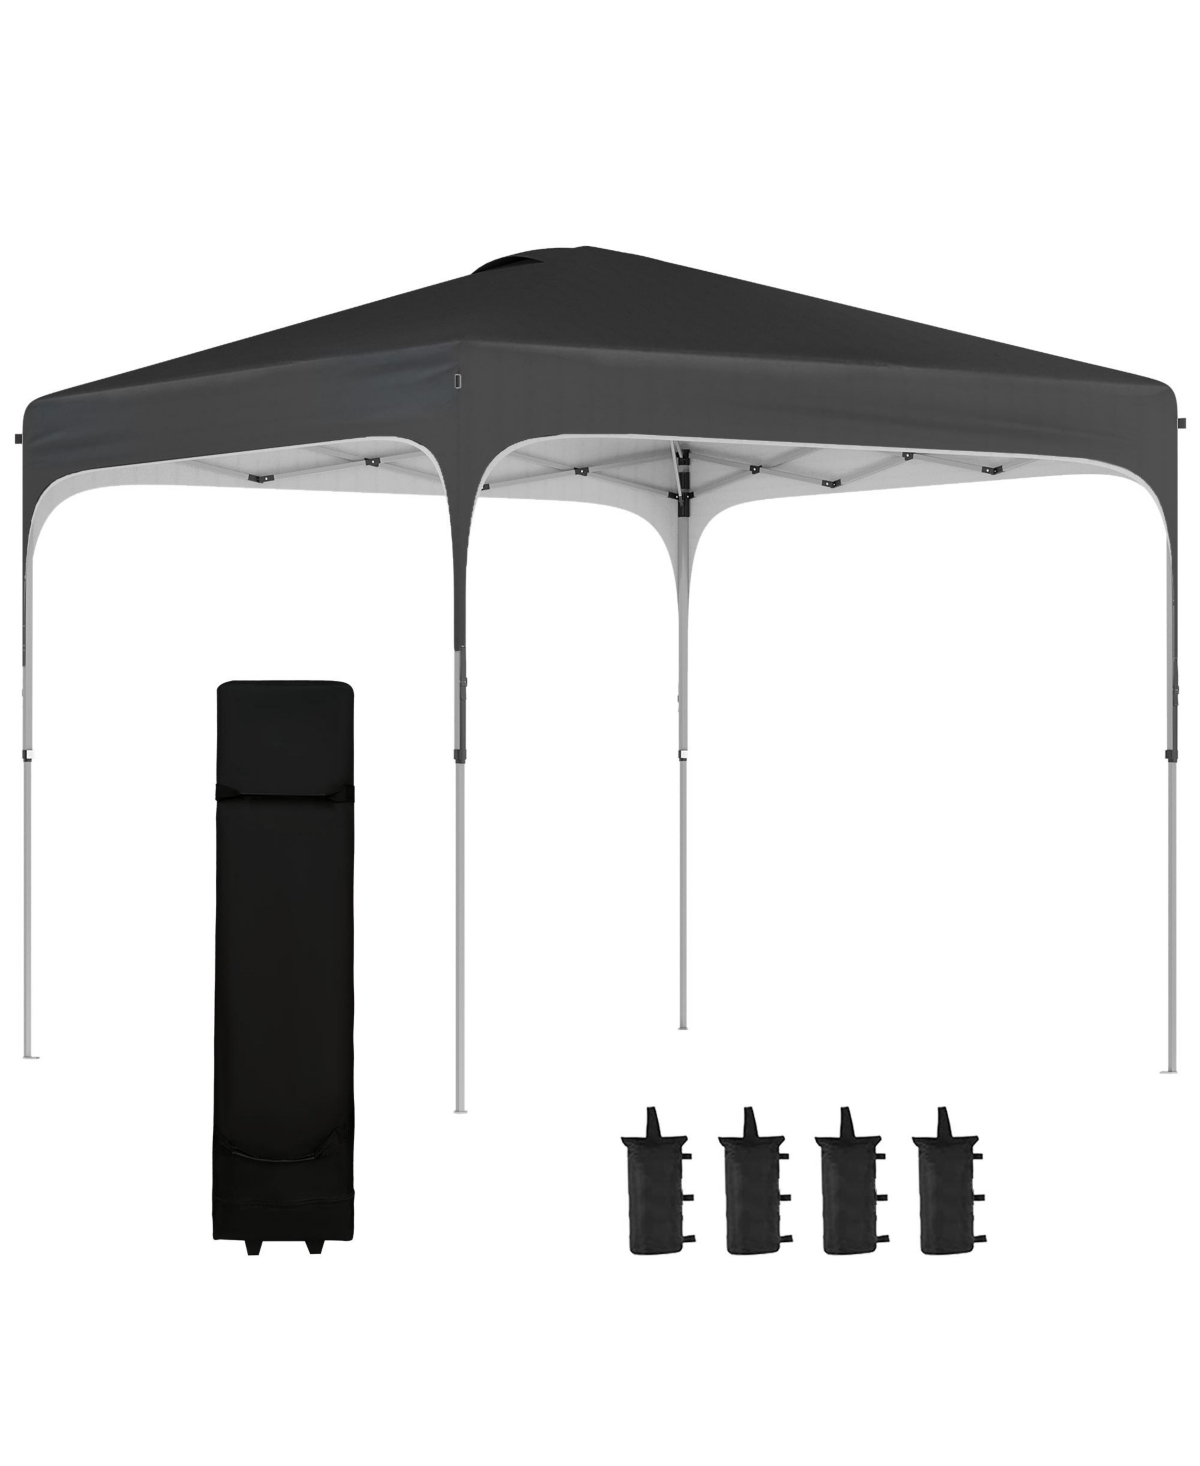 8' x 8' Pop Up Canopy with Adjustable Height, Foldable Gazebo Tent with Carry Bag with Wheels and 4 Leg Weight Bags for Outdoor Garden Patio